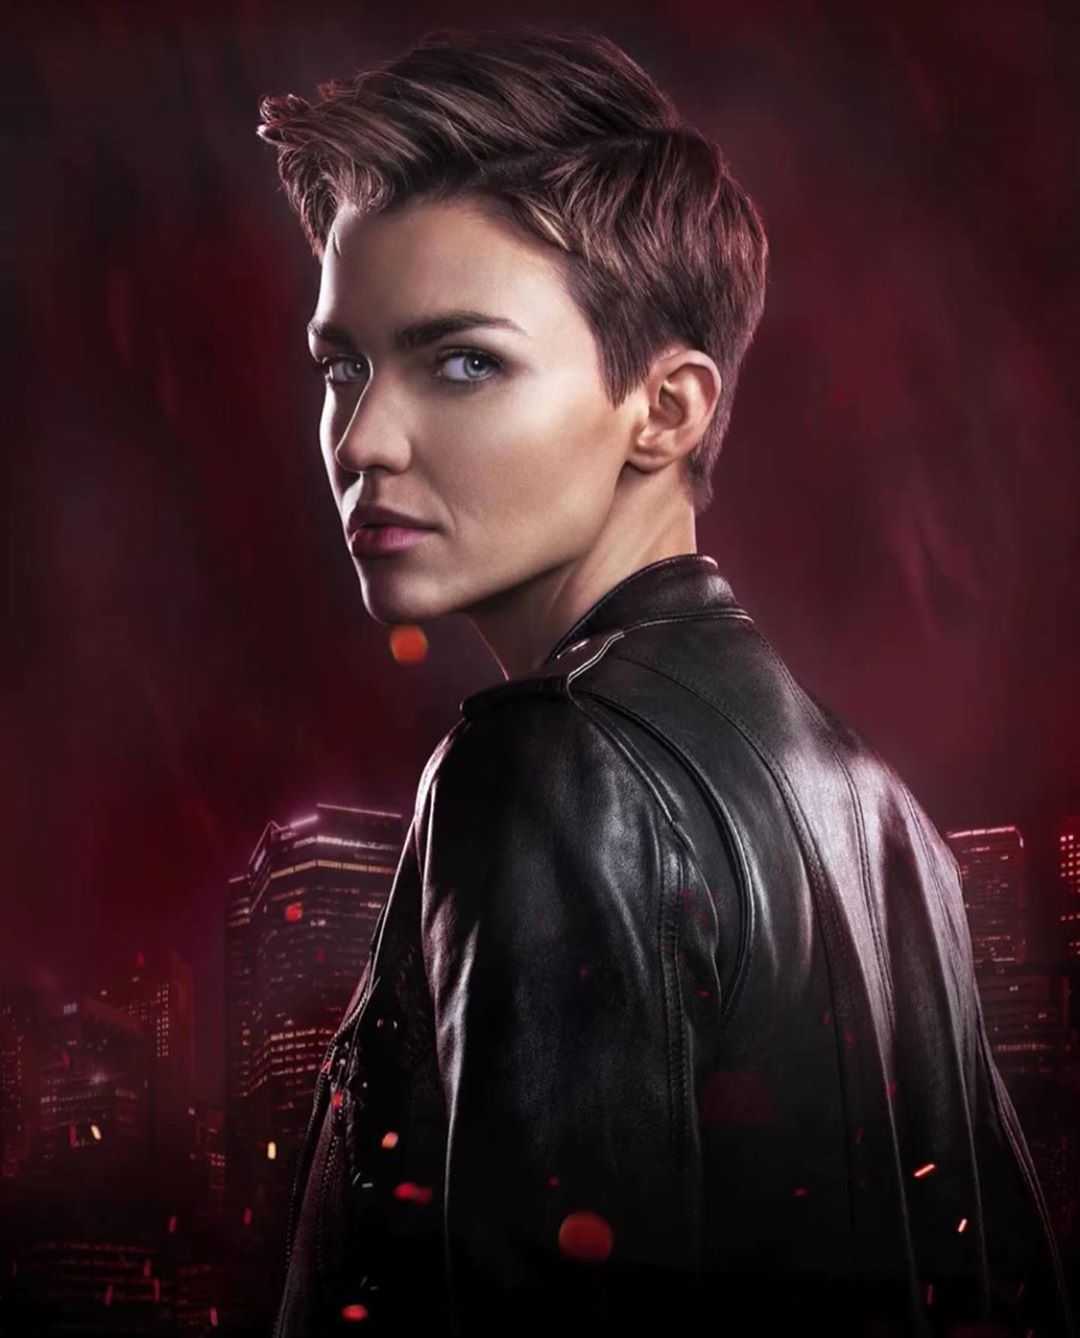 70+ Hot Pictures Of Ruby Rose – Batgirl In Arrowverse And Orange Is The New Black Star. 28